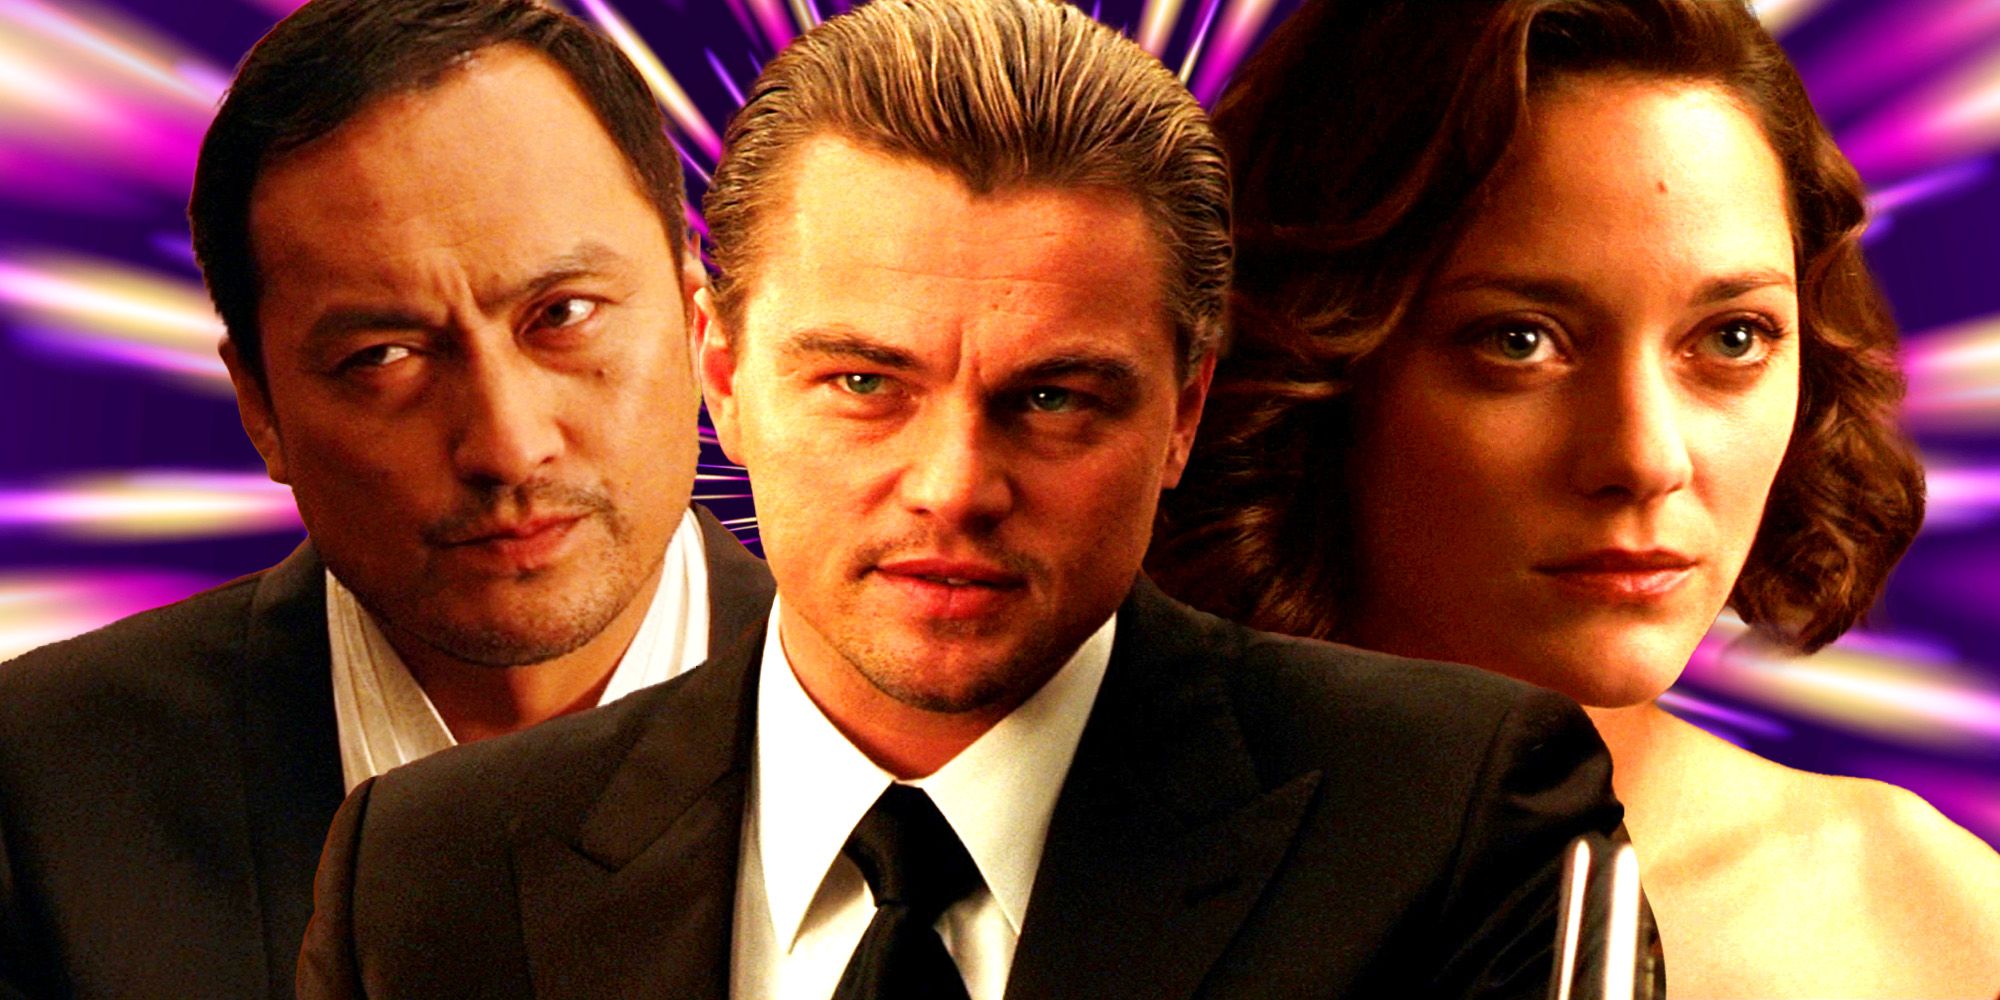 Leonardo DiCaprio, Ken Watanabe, and Marion Cotillard from Incpetion